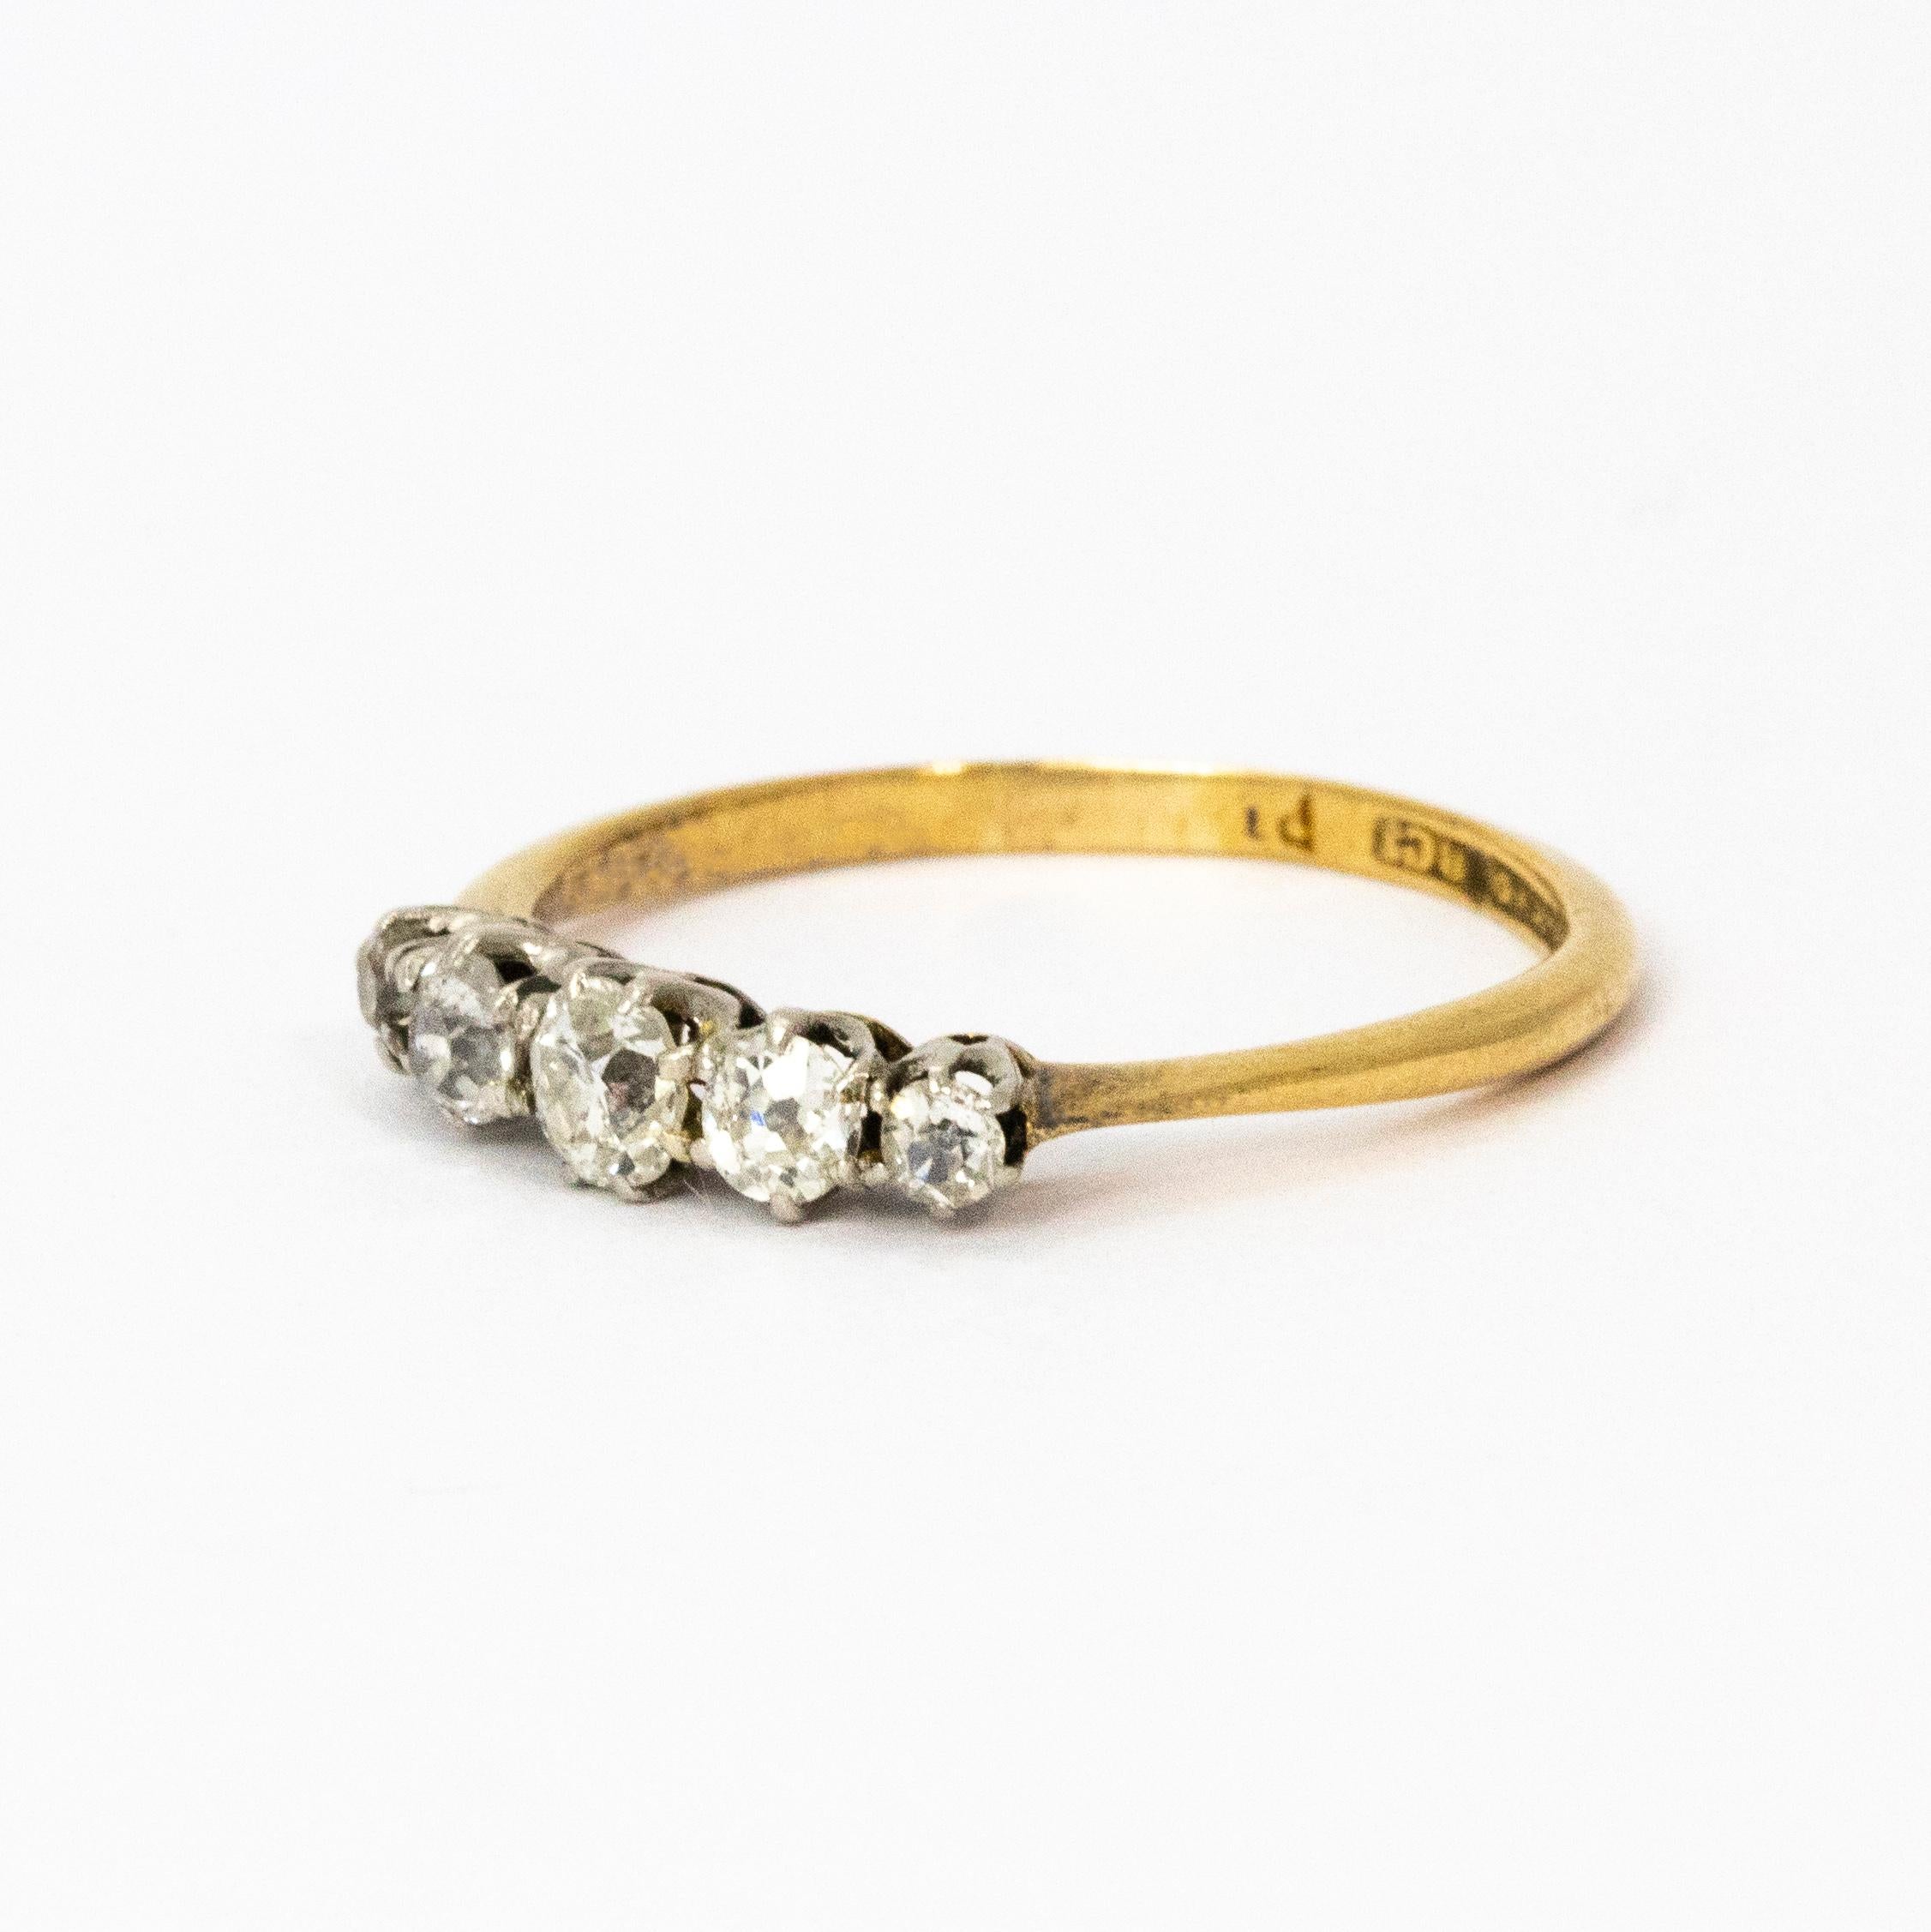 Crafted in 1910, this stunning five-stone ring is set with beautiful white graduated diamonds. The central diamond measures 20 points, the two flanking stones measure 10 points each, and the outside stones measure 5 points each. Total diamond weight